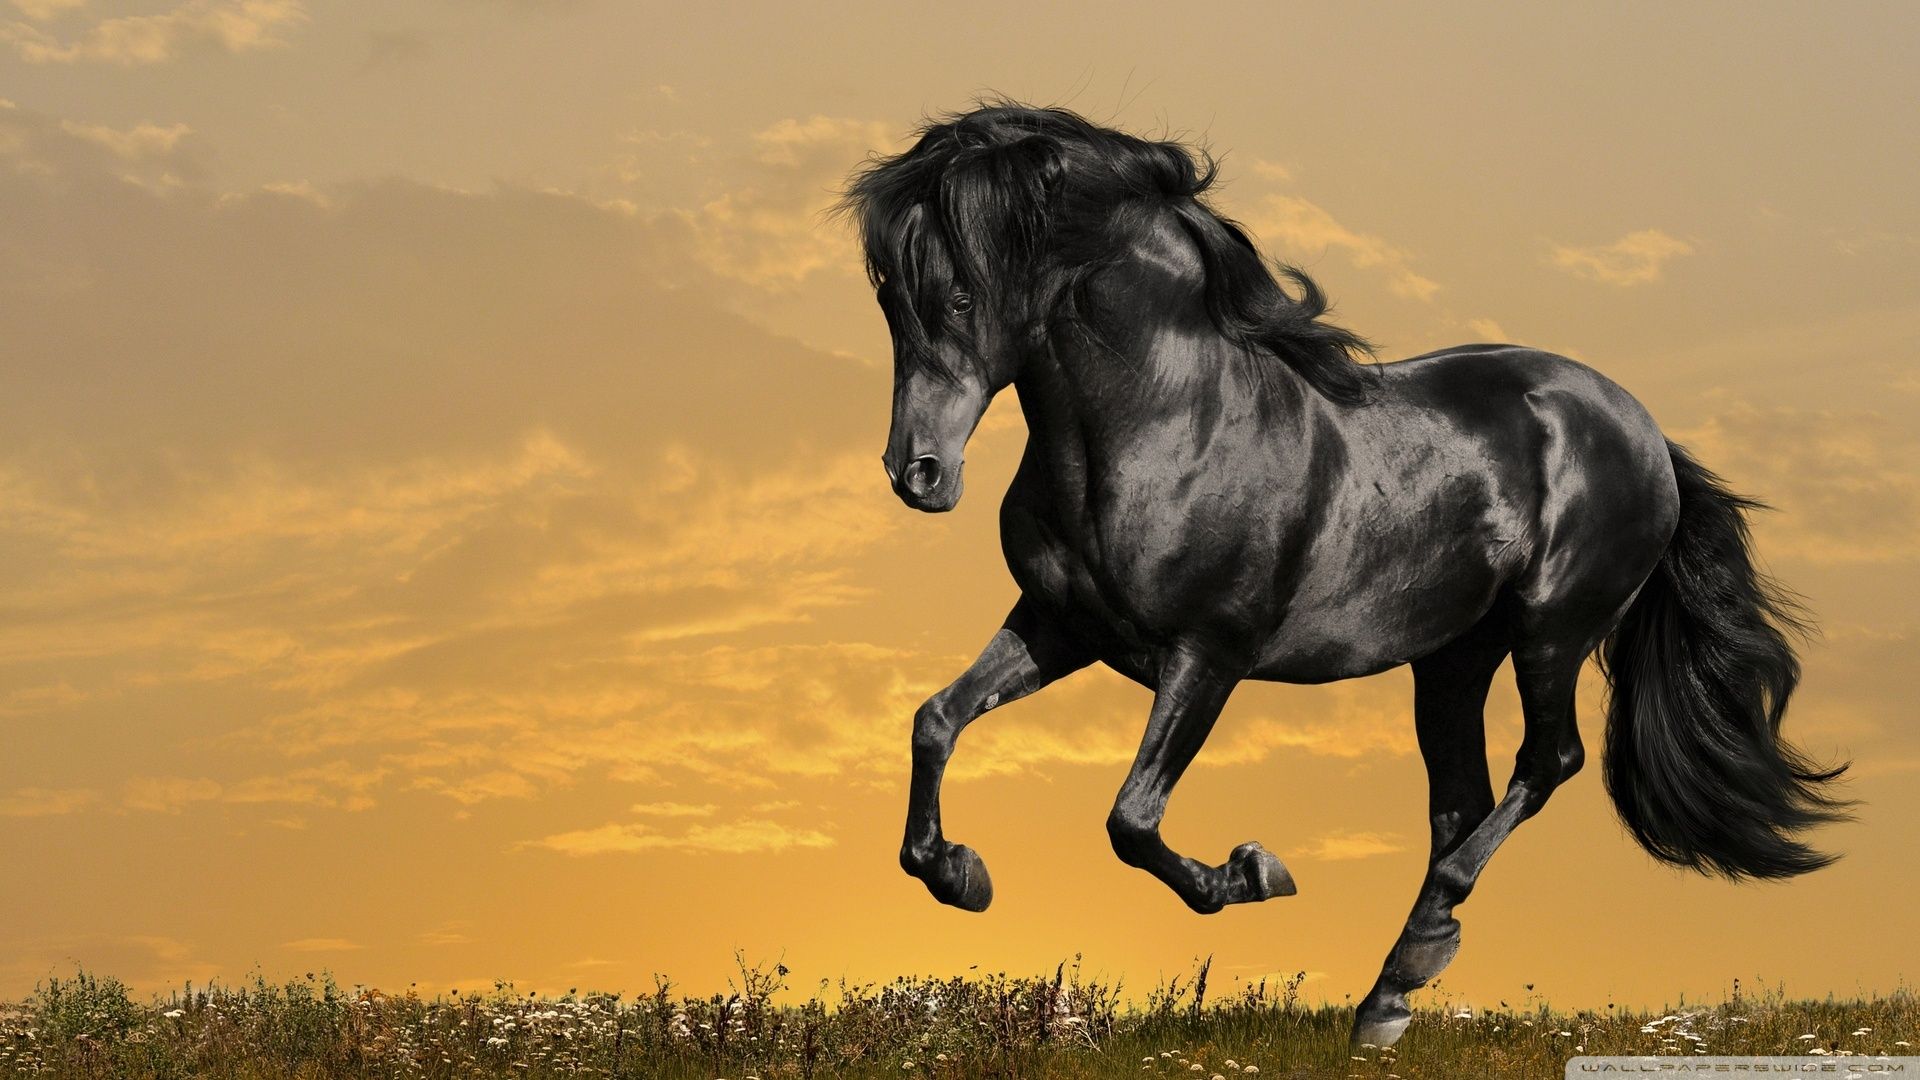 Black Horse HD Wallpapers | Black Horse Images | Cool Wallpapers